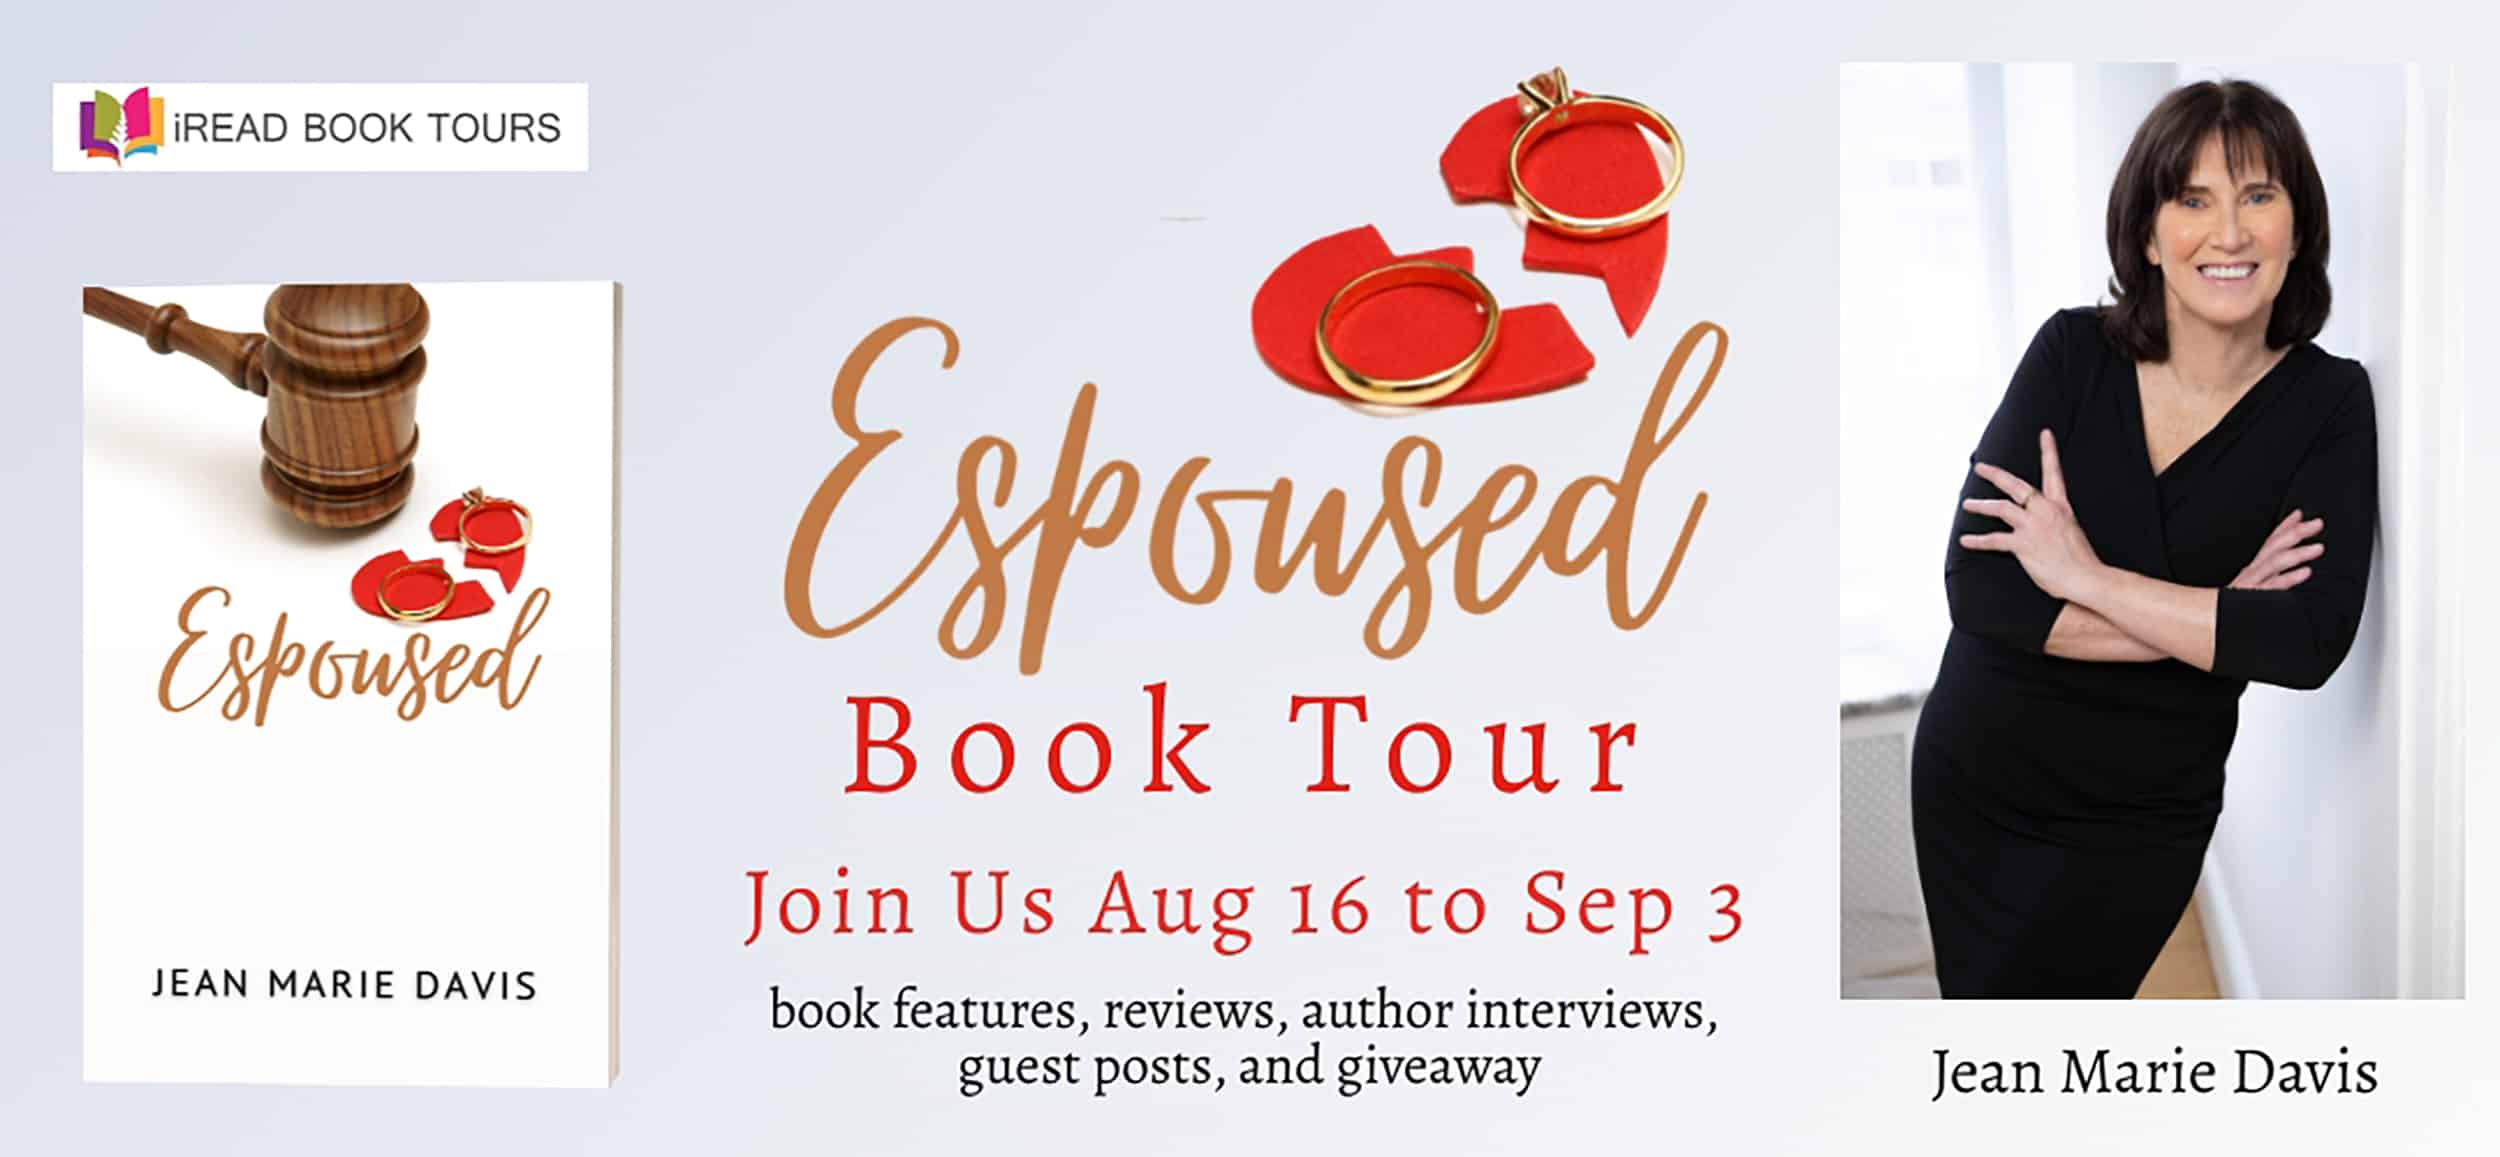 Espoused by Jean Marie Davis | Review - Interview - $25 + Book Giveaway